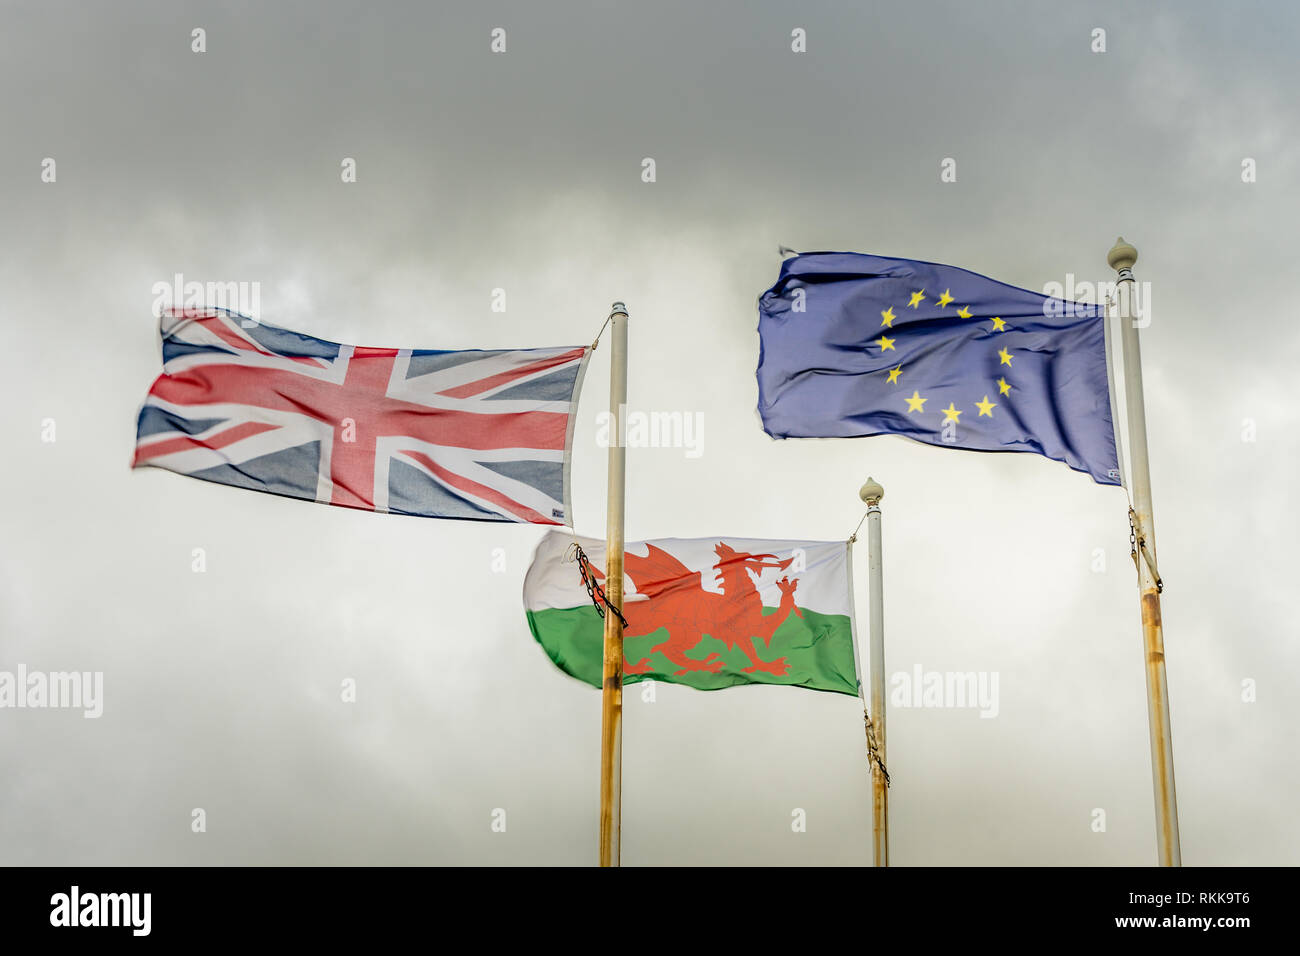 The Red Dragon flag of Wales, the European Union (EU)  Flag and the Union Jack (UK flag) Stock Photo